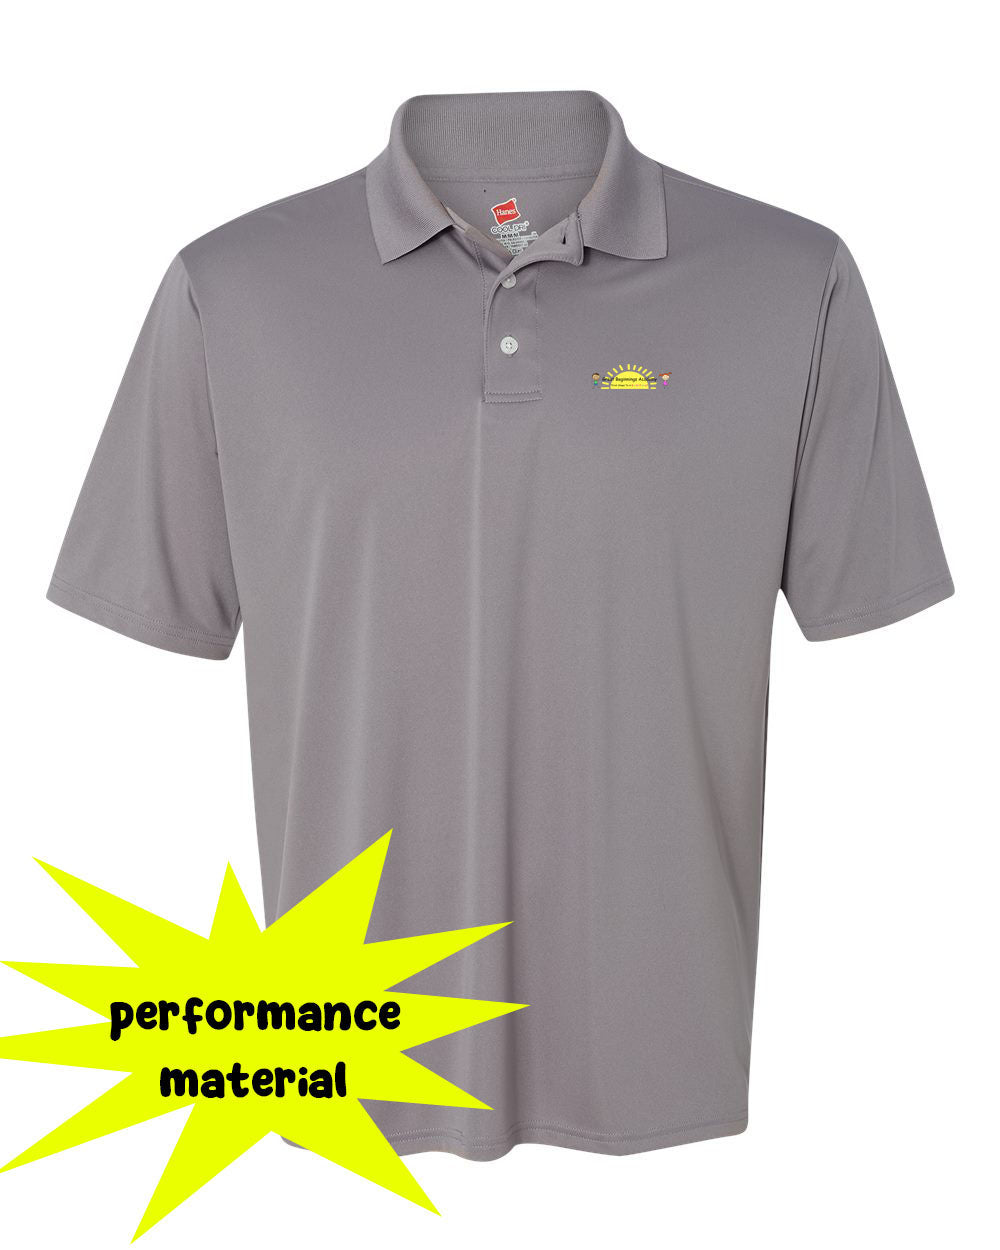 Great Beginnings Performance Material Polo T-Shirt Design 1